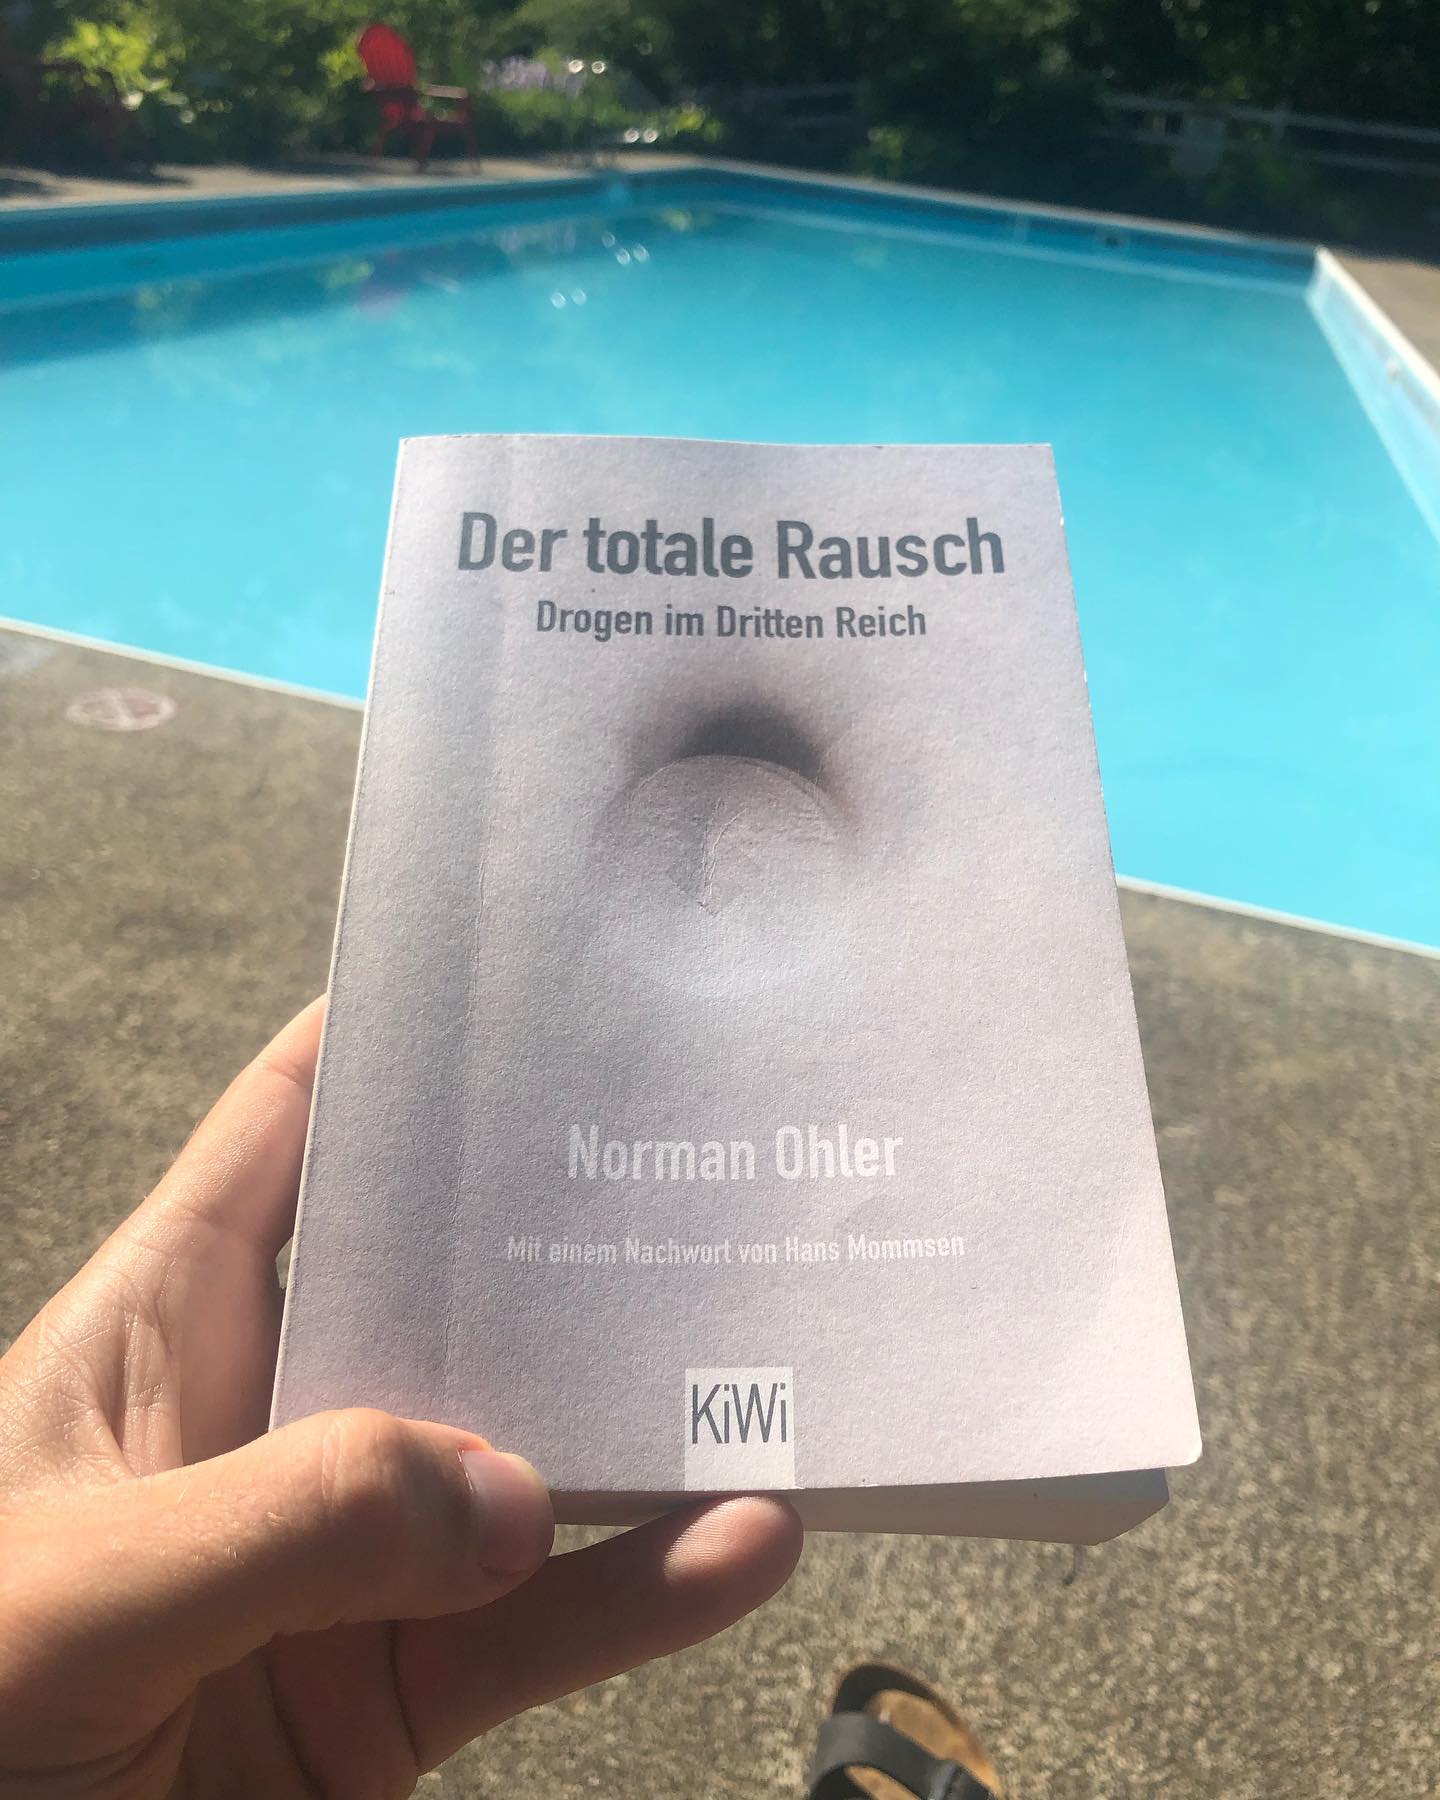 Norman Ohler’s “Der totale Rausch” (NY Times bestseller “Blitzed”) is totally mind blowing. I just found out that Norman stayed here at the Ledig House, too. 🙋‍♂️
@normanohler
#artomi #writers #writerslife #autorenleben #residency #hudsonvalley #ledighouse @art_omi @kiwi_verlag